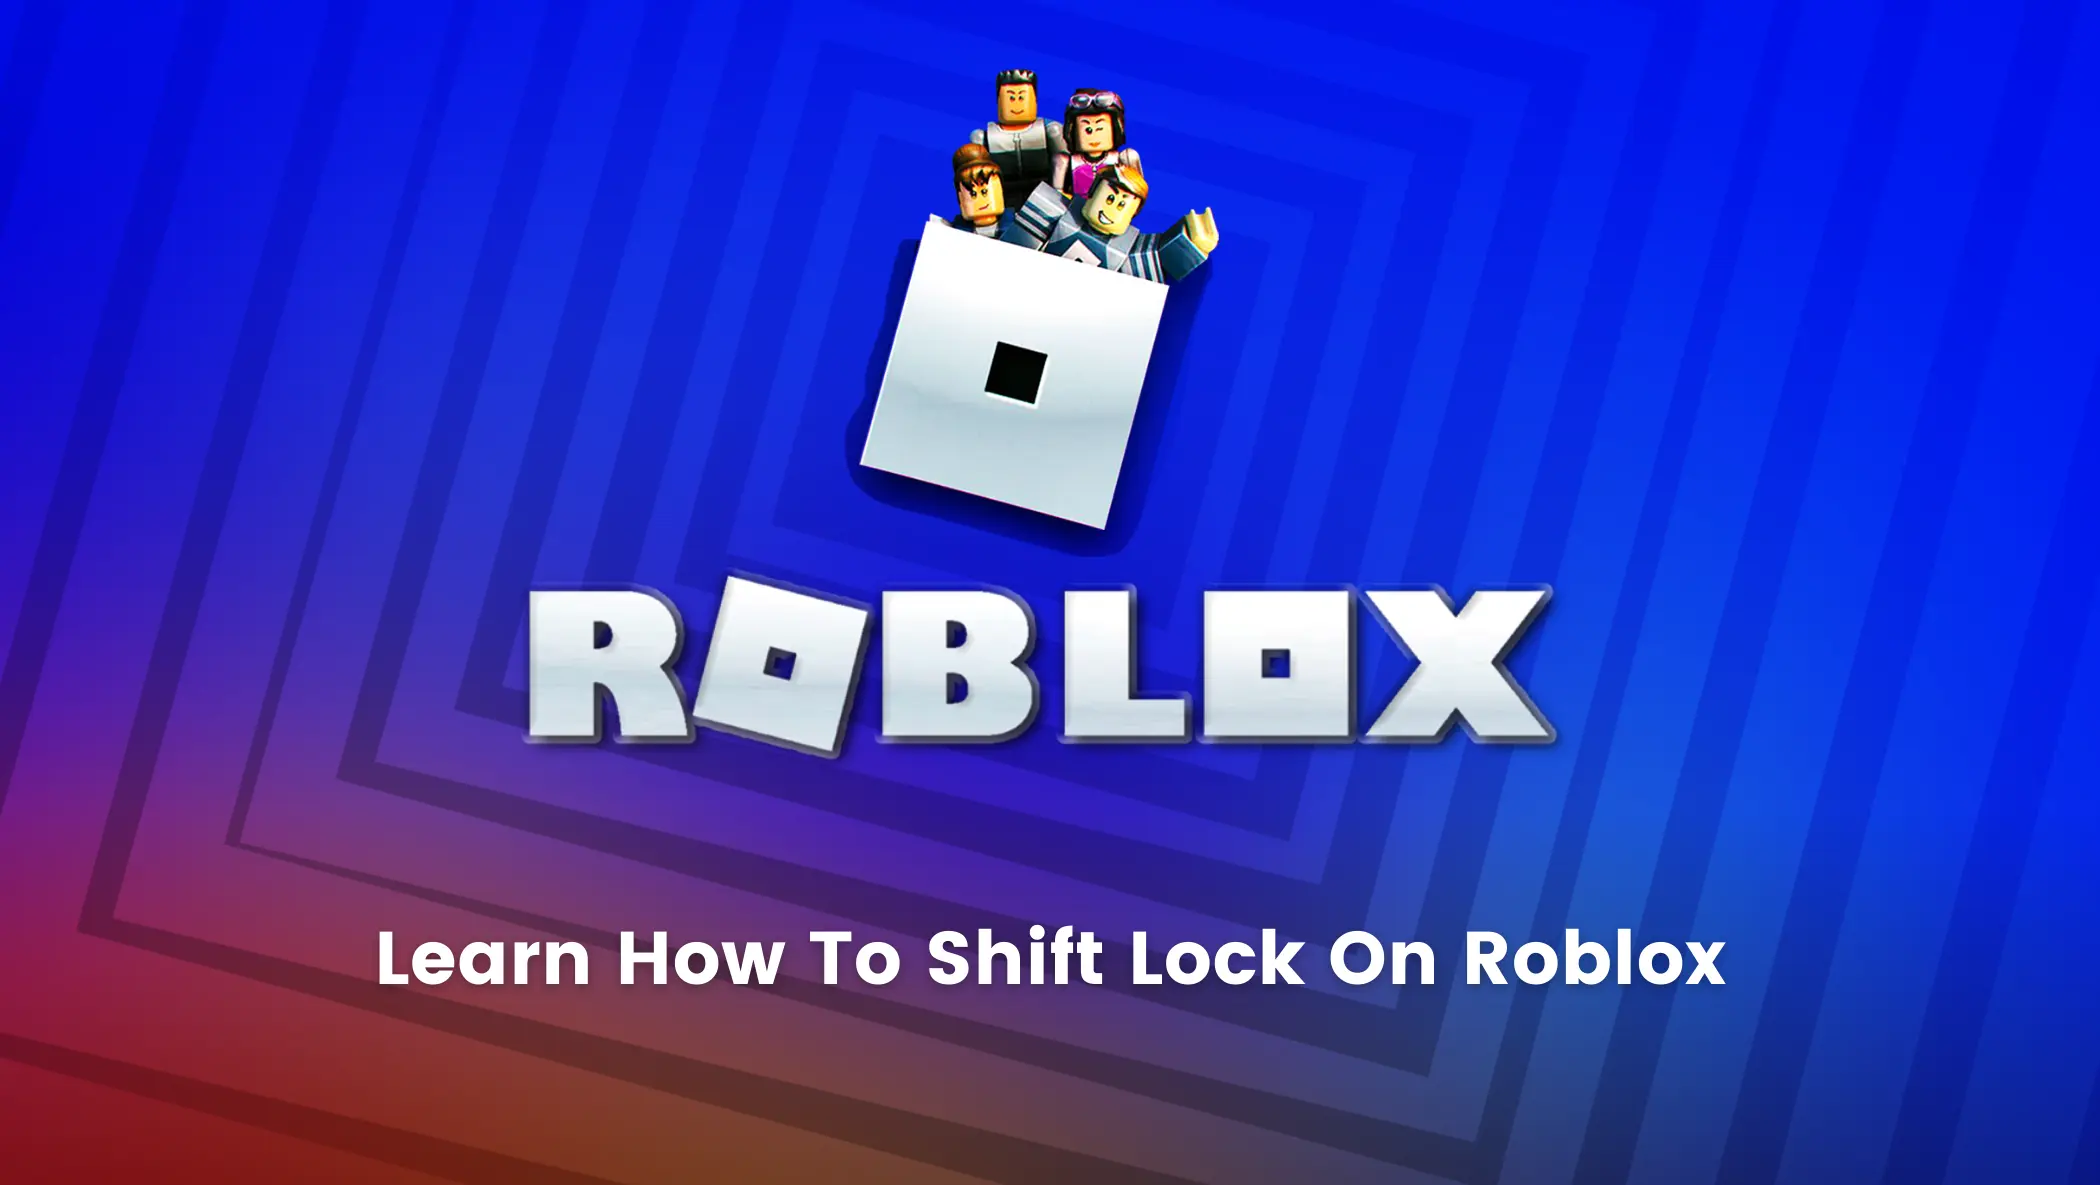 Roblox - We've heard your suggestions and improved the Roblox